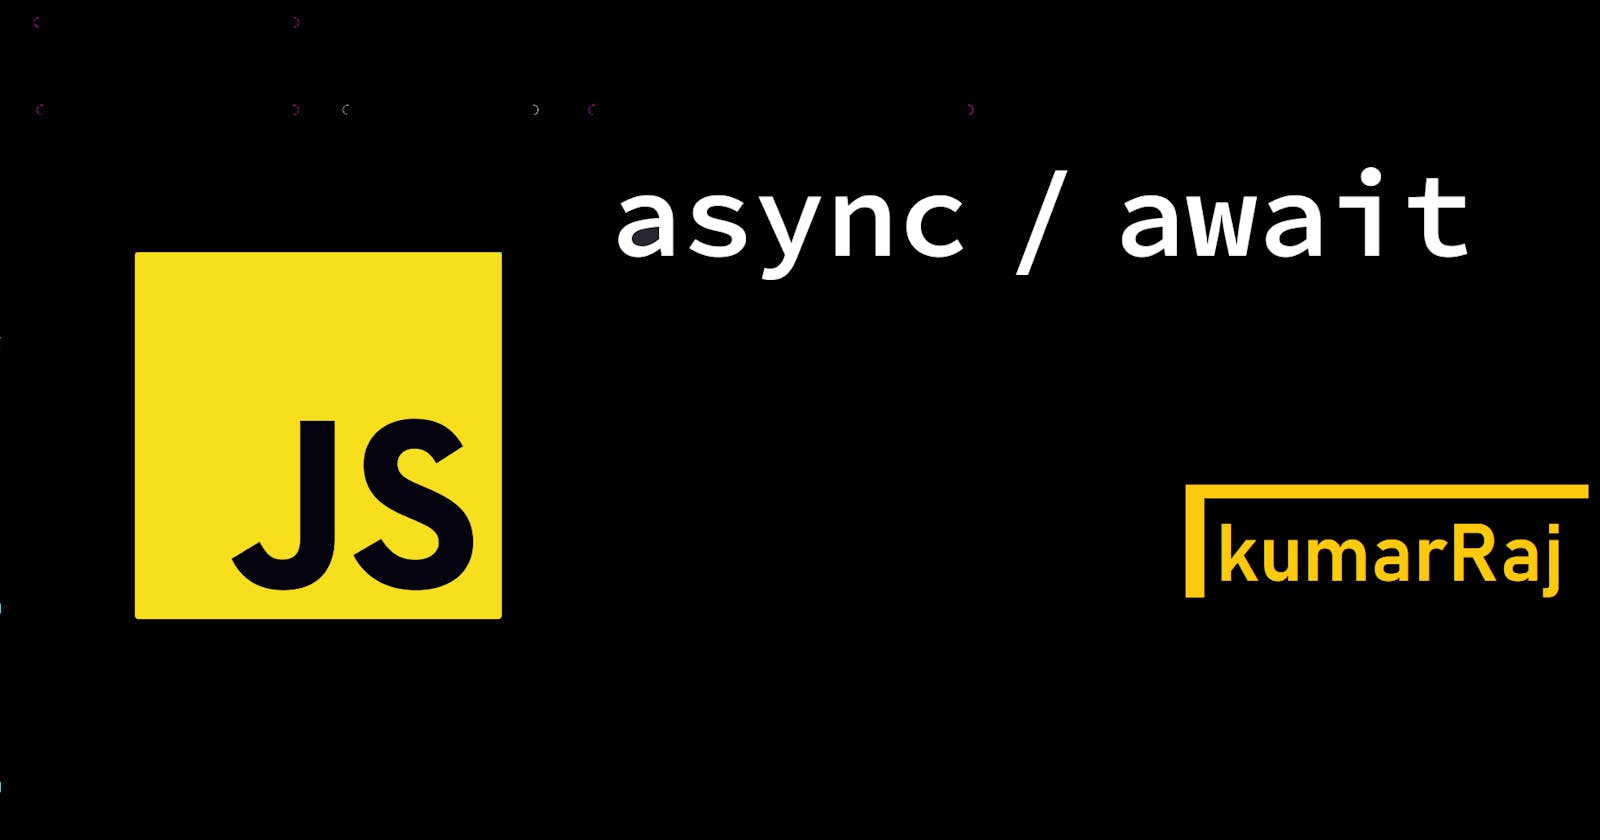 Async and Await in JS